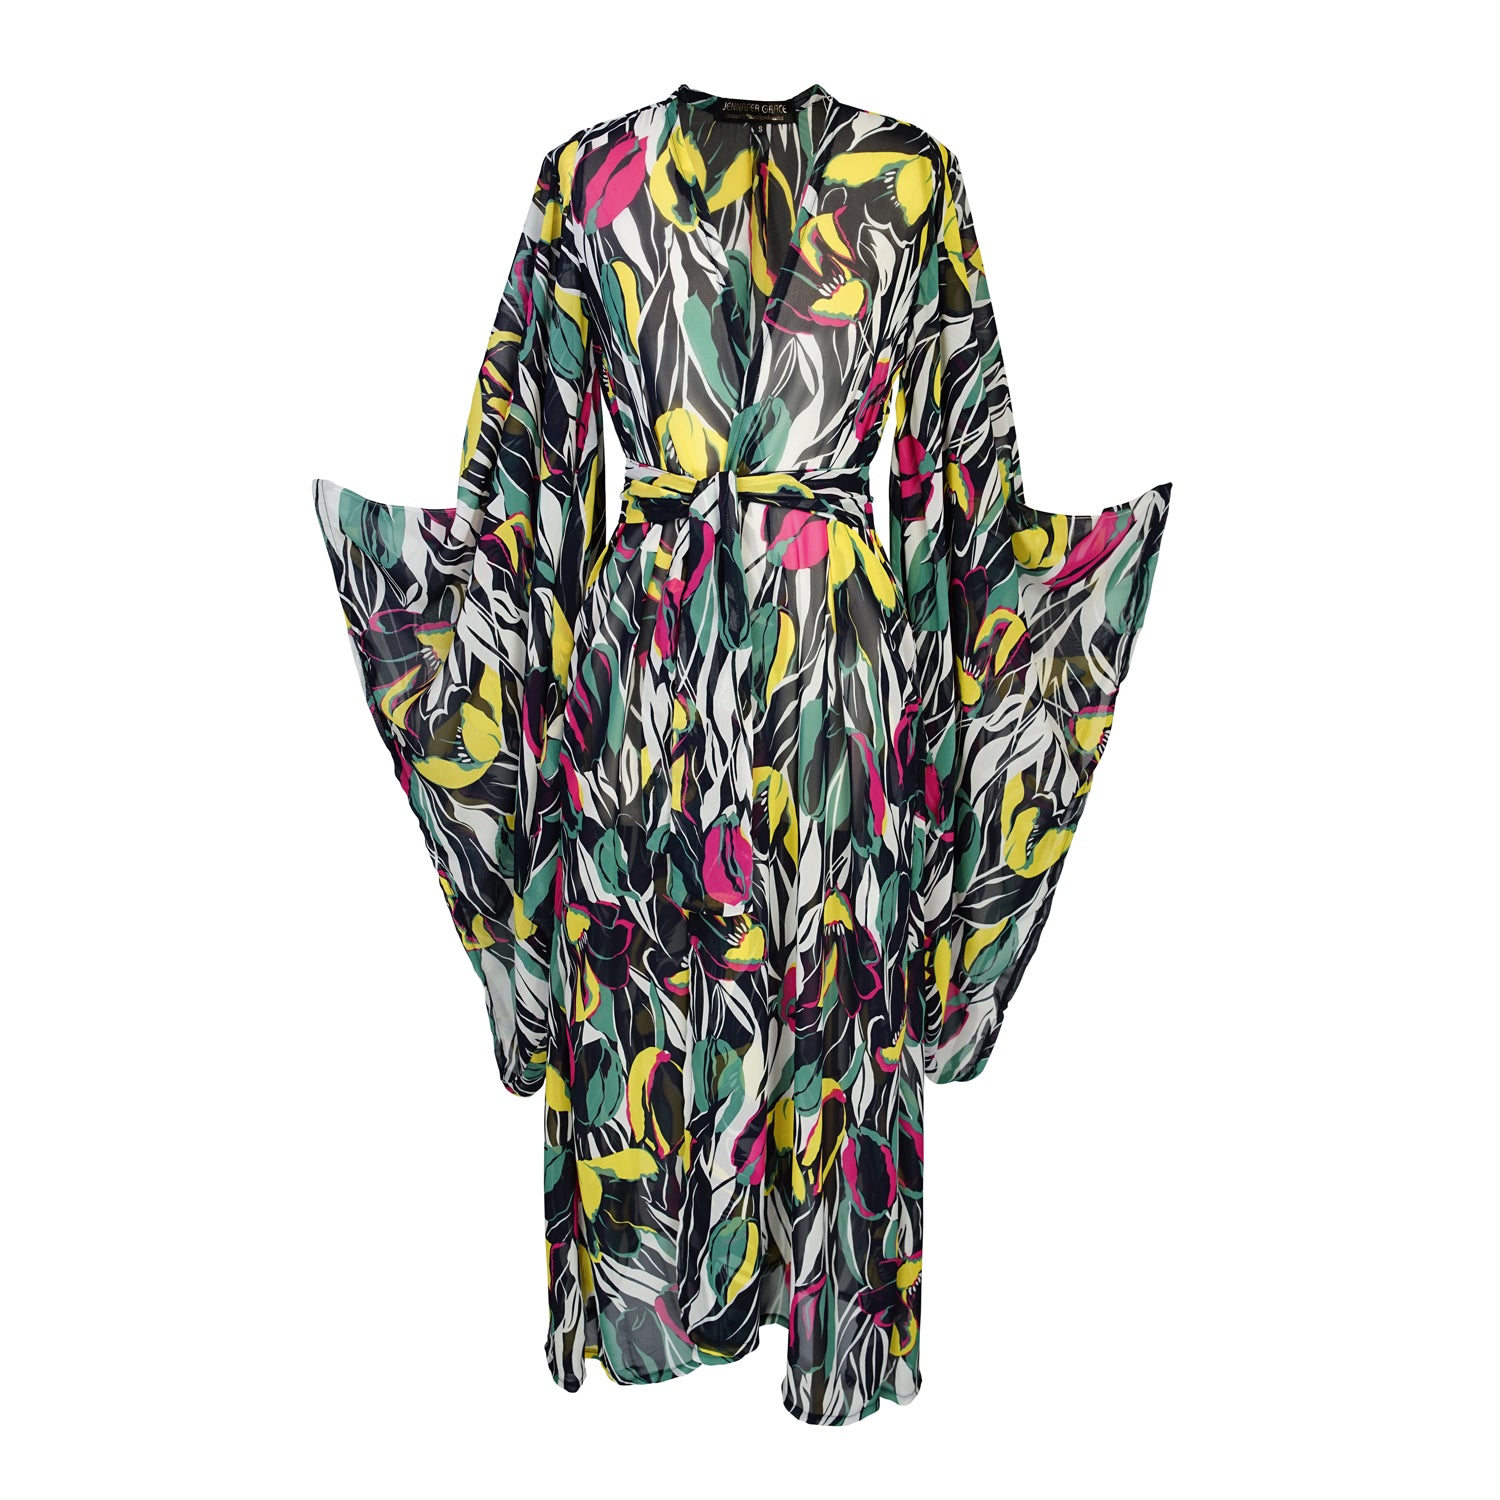 jennafer grace Exotica Cruise kimono semi-sheer chiffon with yellow green pink tulip floral flower print on abstract black and white cover-up wrap dress with pockets duster jacket robe boho boho bohemian hippie whimsical romantic beach poolside resort cabana lounge wear unisex handmade in California USA